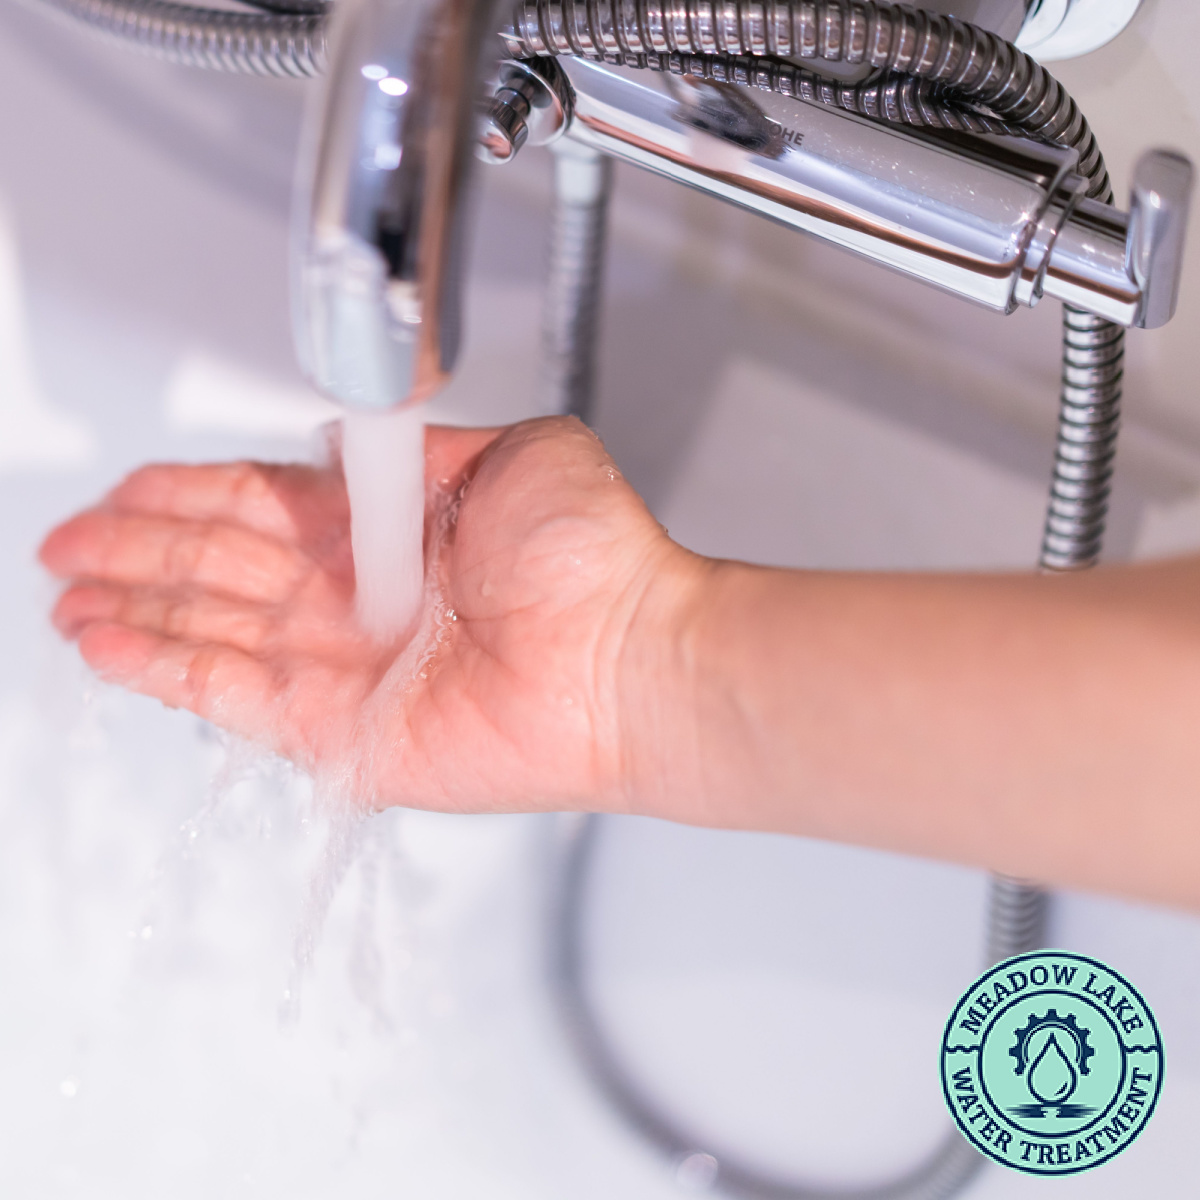 When Hamilton Residents Need Water Softener Services Meadow Lake Water Treatment Tops All